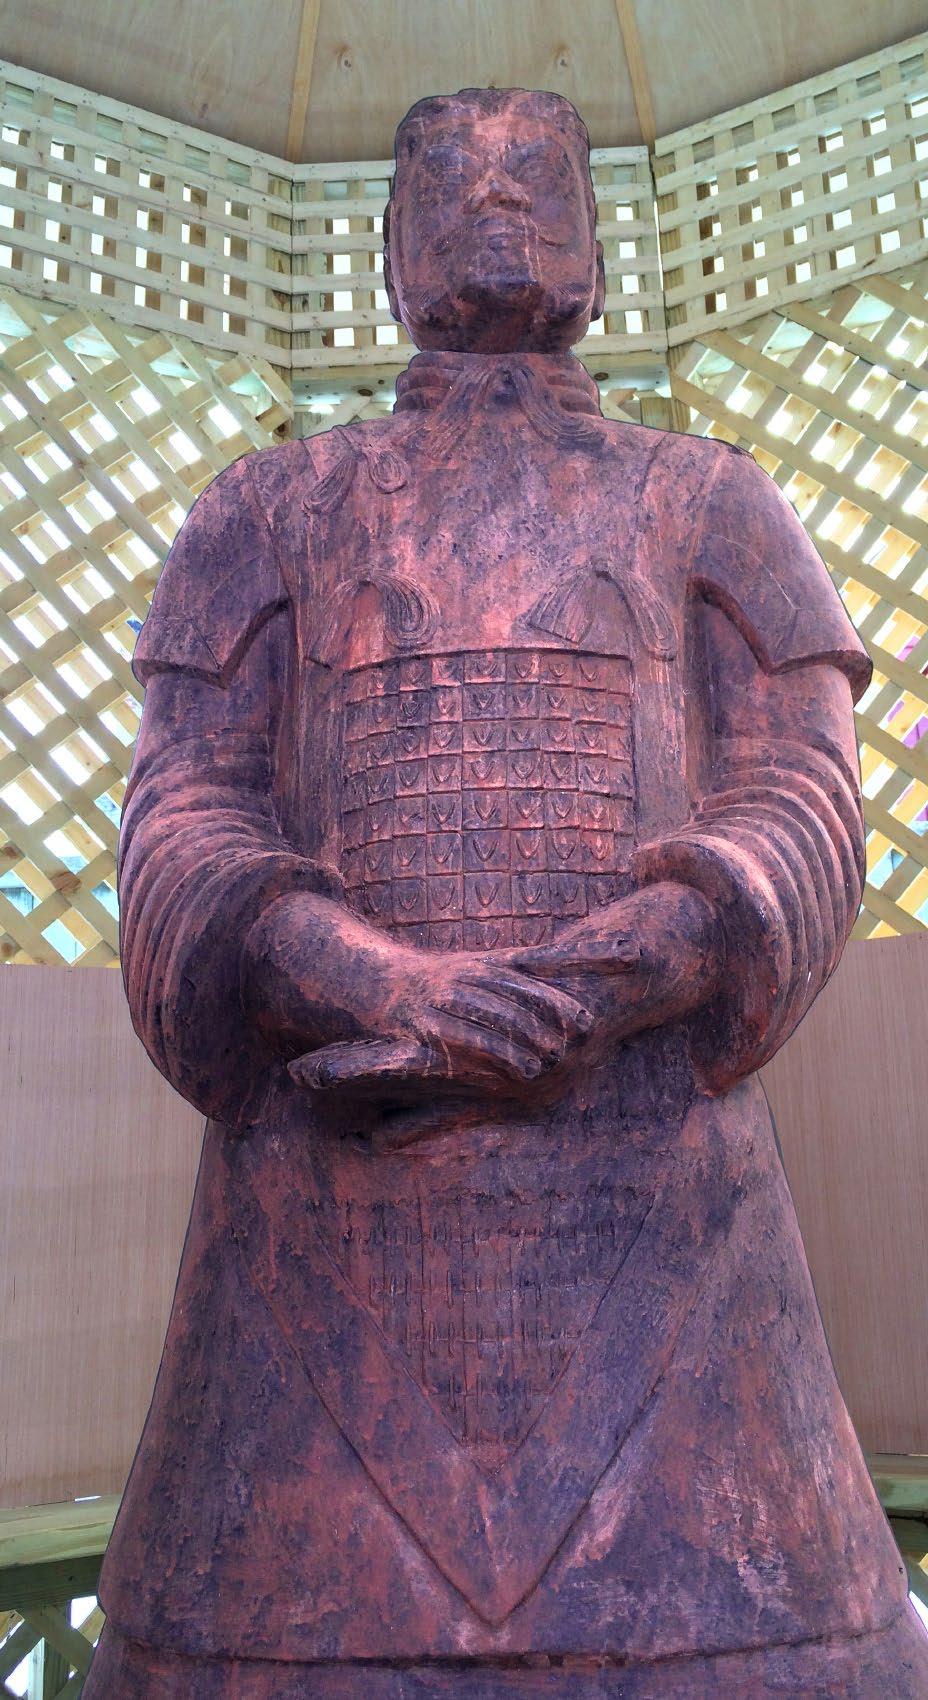 Love at La Vie de la Rose The Terracotta Army is a collection of sculptures depicting the armies of Qin Shi Huang, the